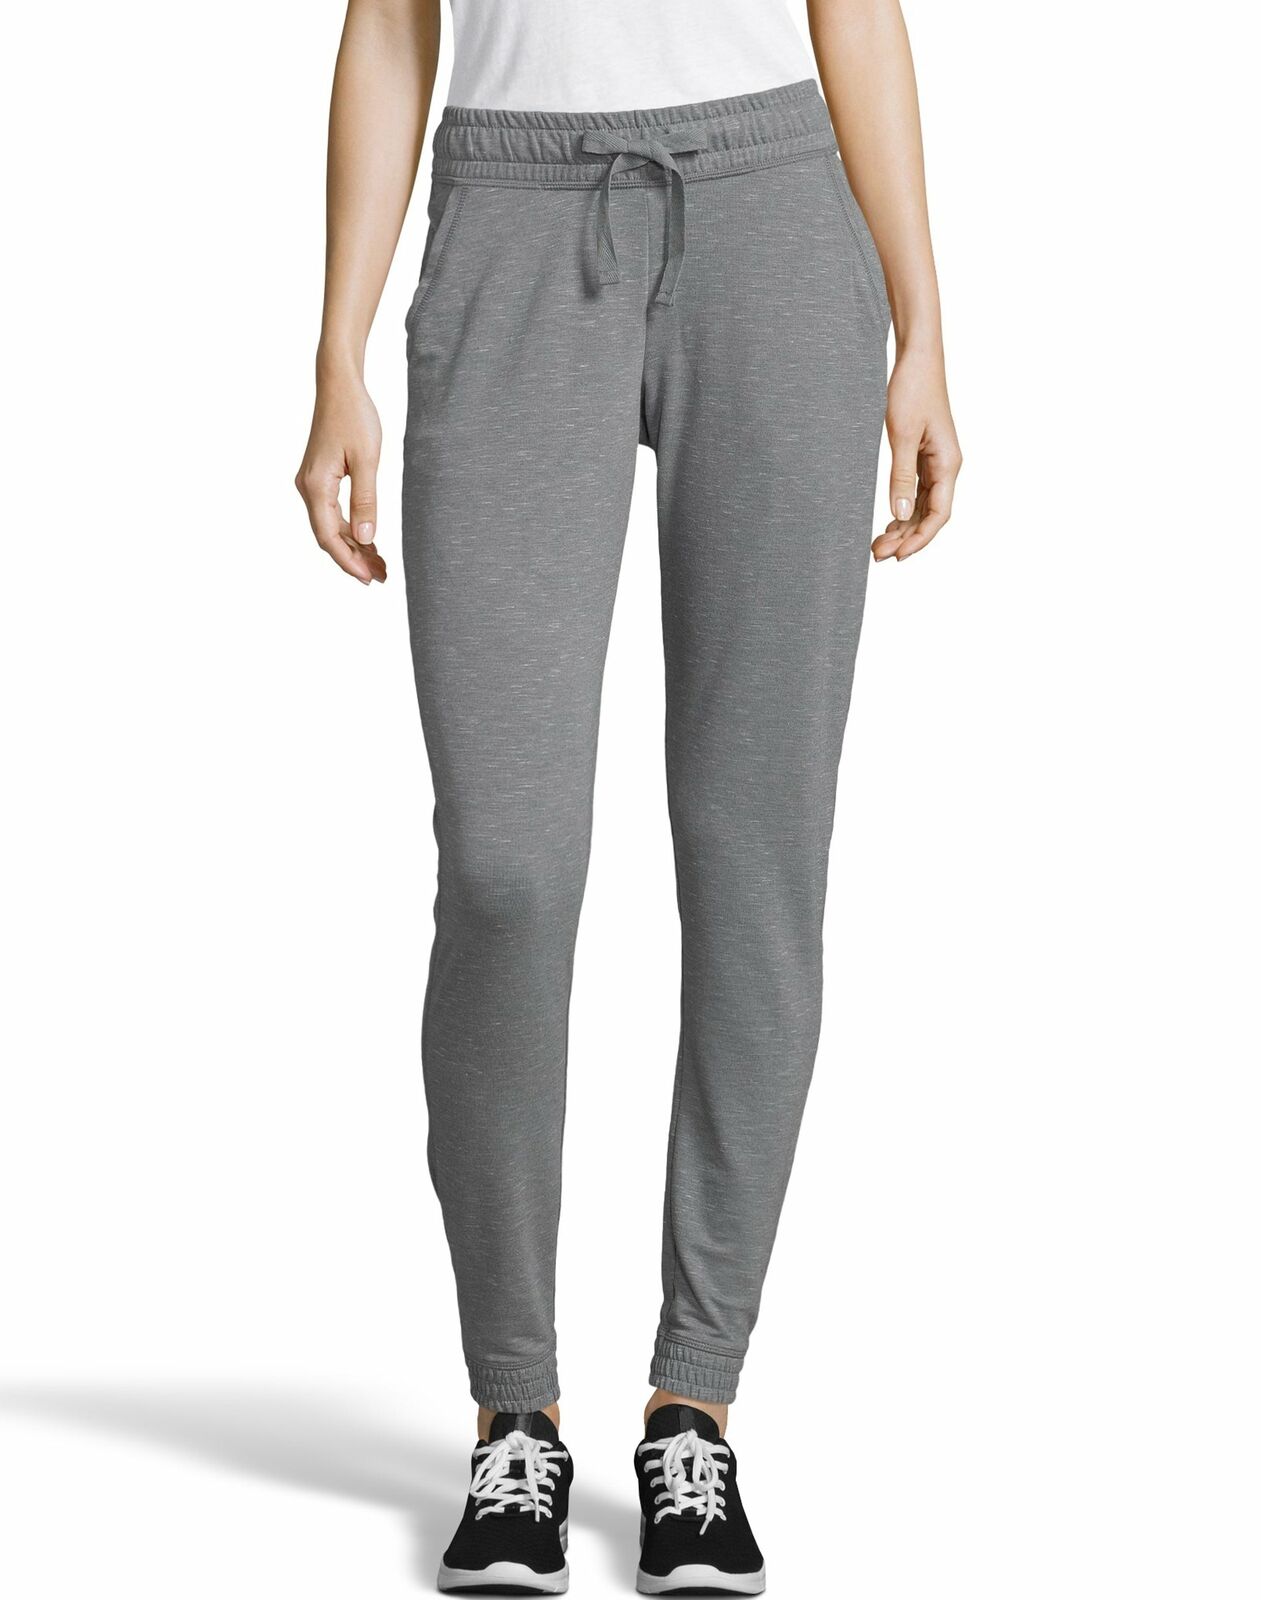 Hanes Sweatpants Jogger Pockets Women's Tri Blend French Terry Drawcord Fleece